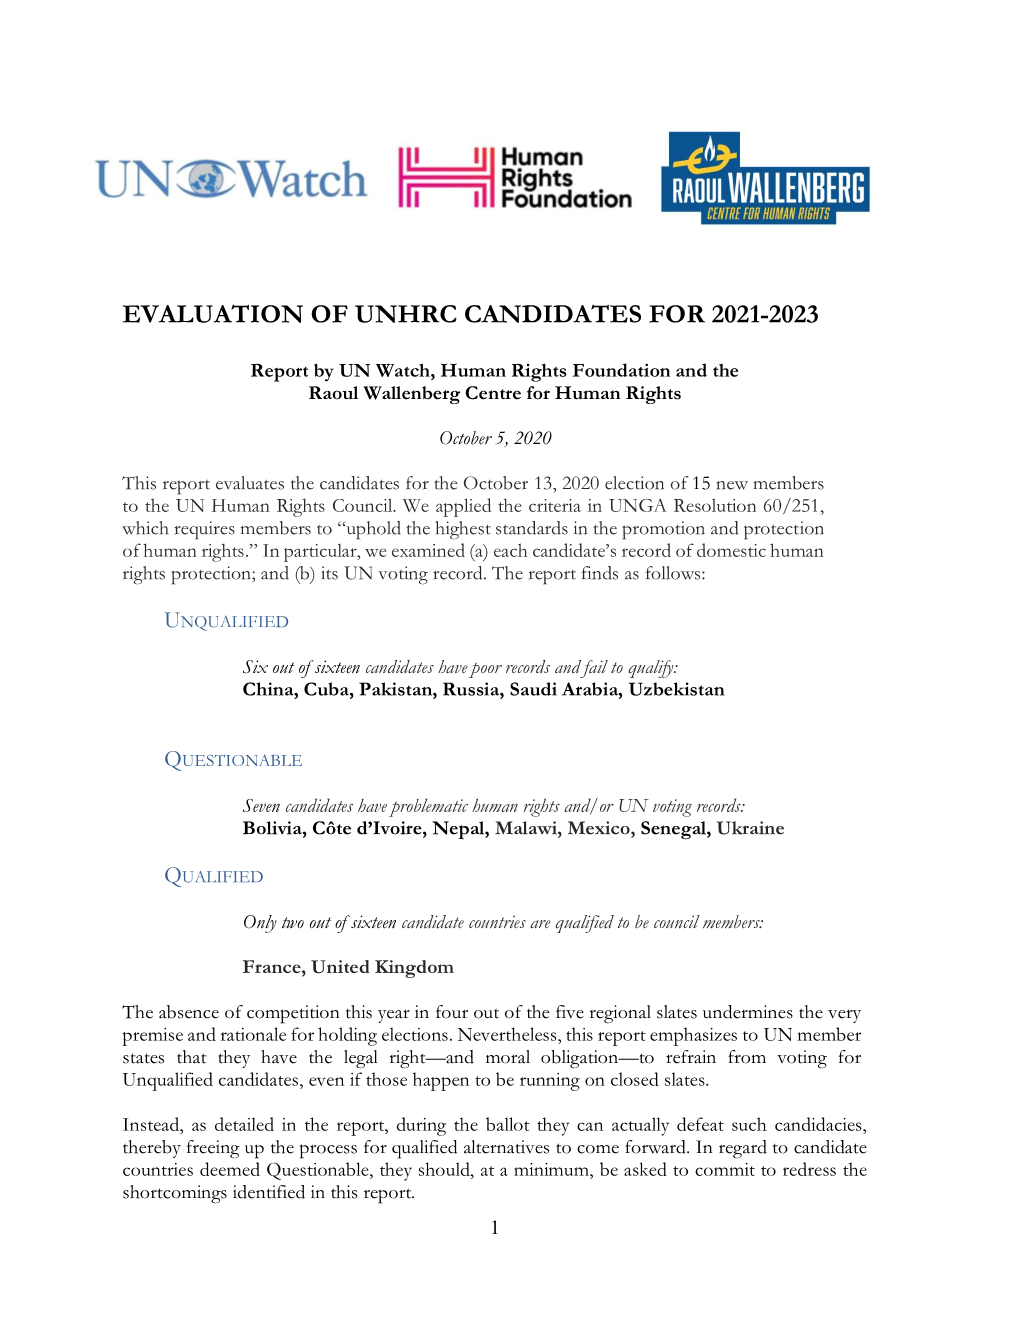 Evaluation of Unhrc Candidates for 2021-2023